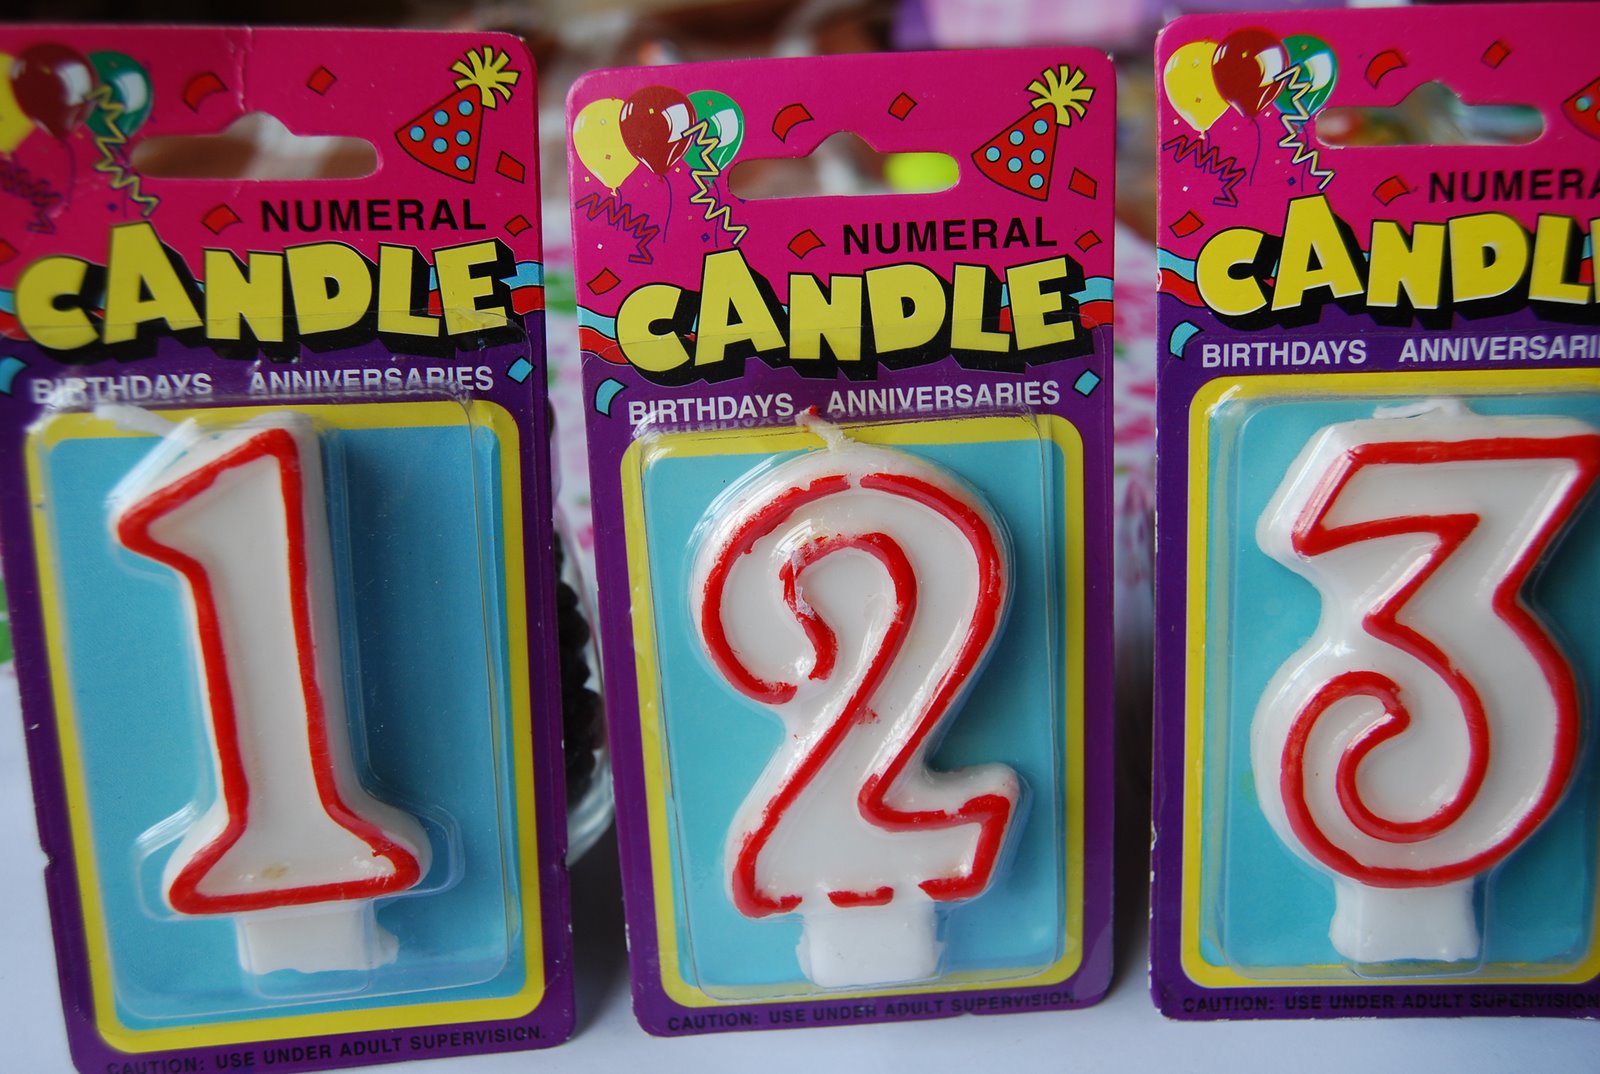 [numeral+candle.JPG]